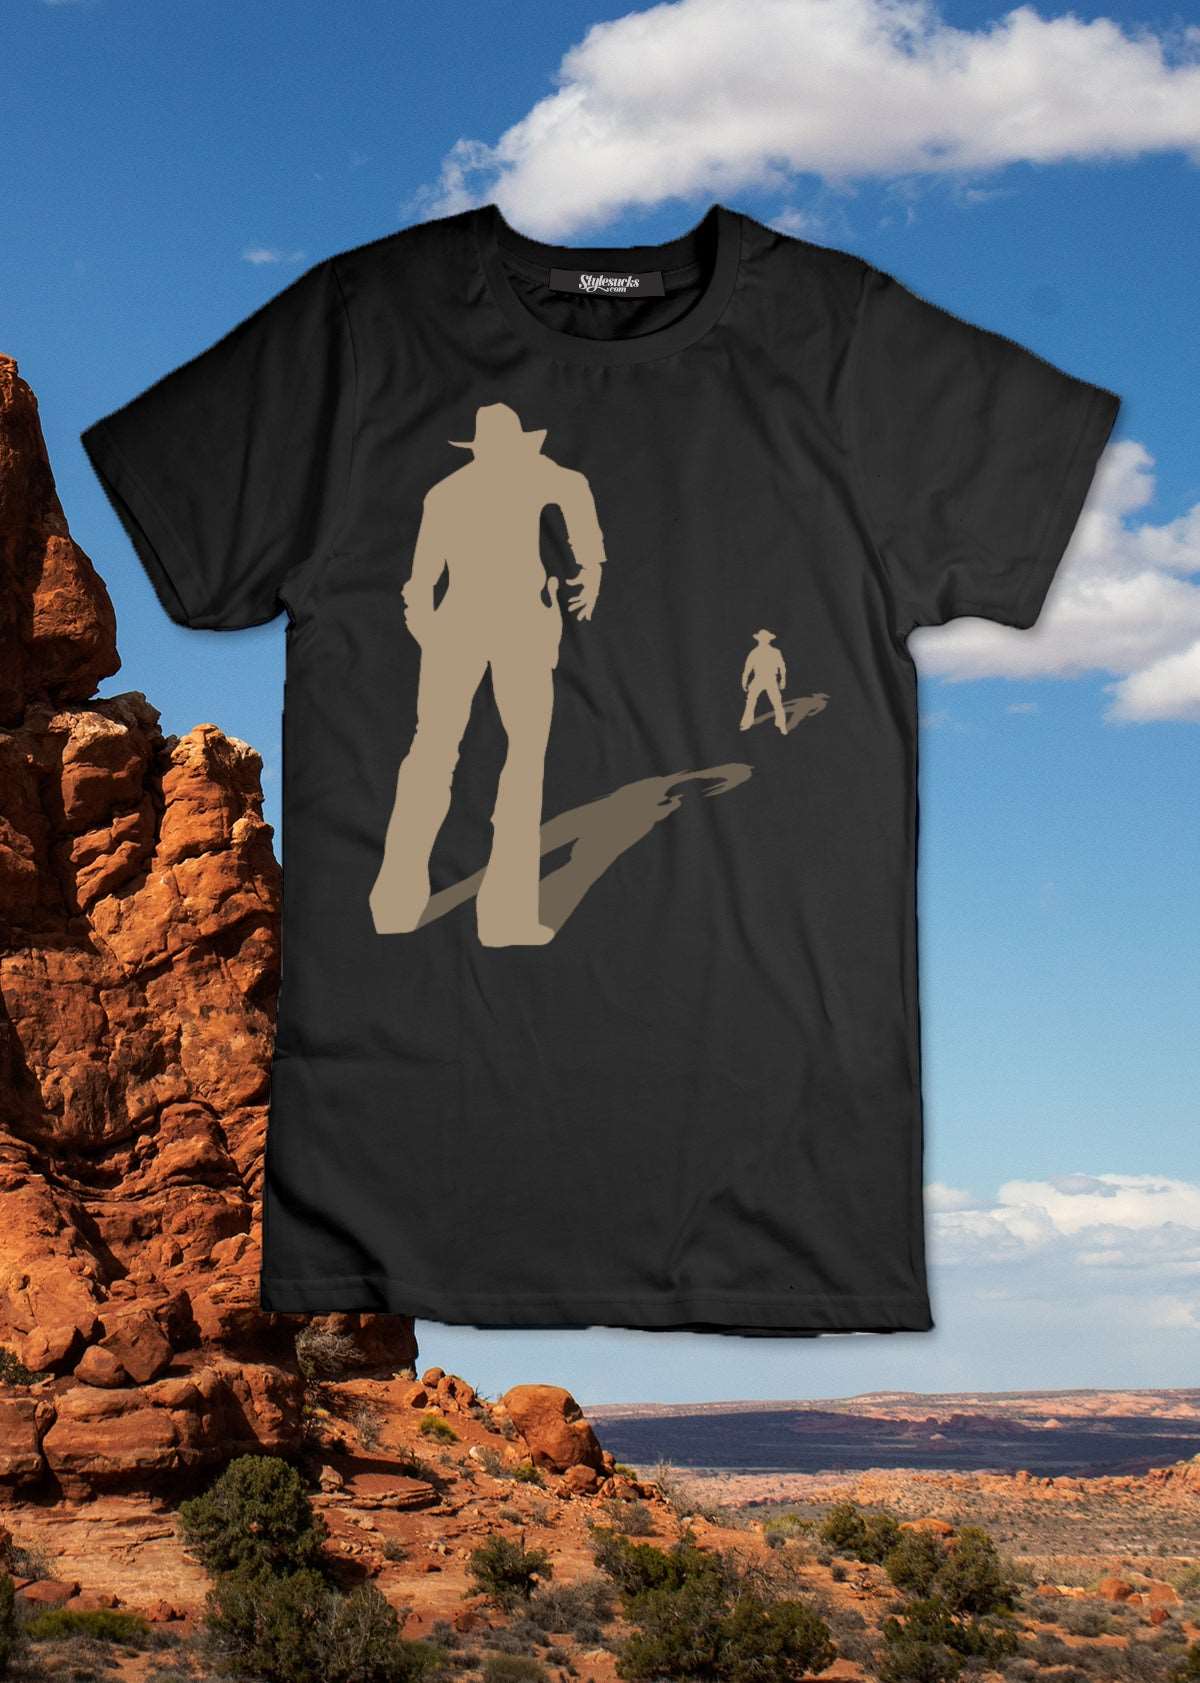 The Duel T-Shirt